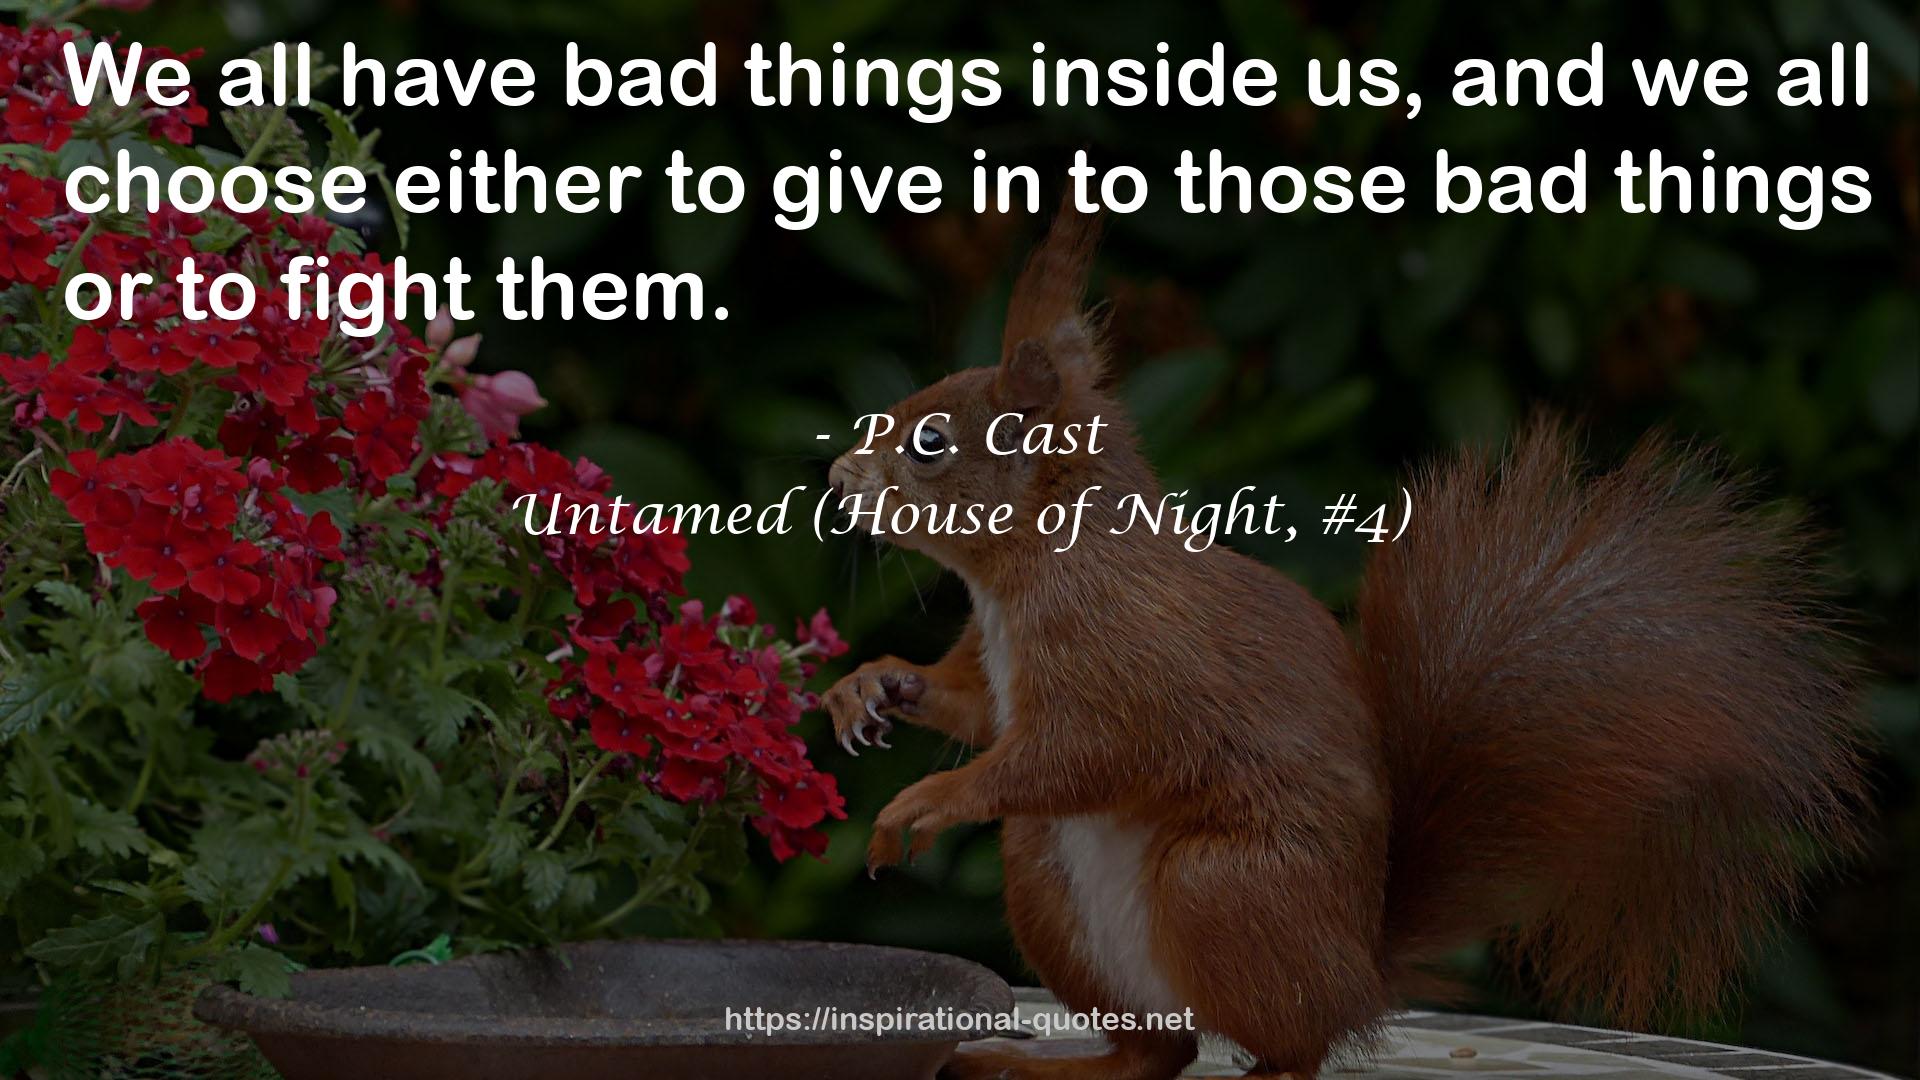 those bad things  QUOTES